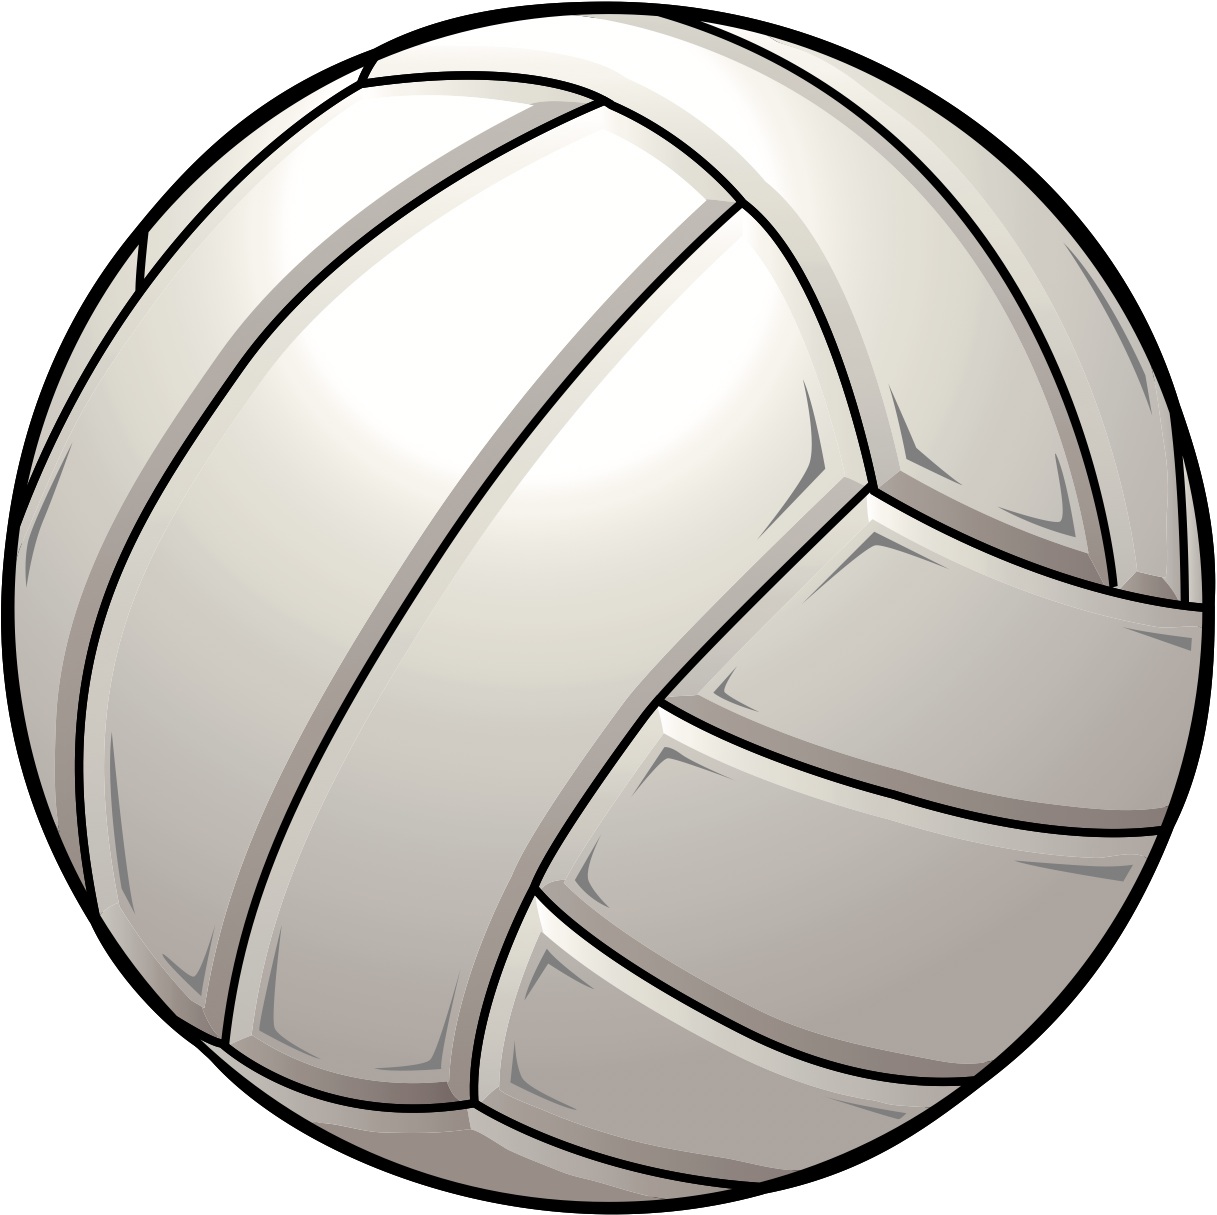 Free Volleyball Cliparts, Download Free Clip Art, Free Clip.